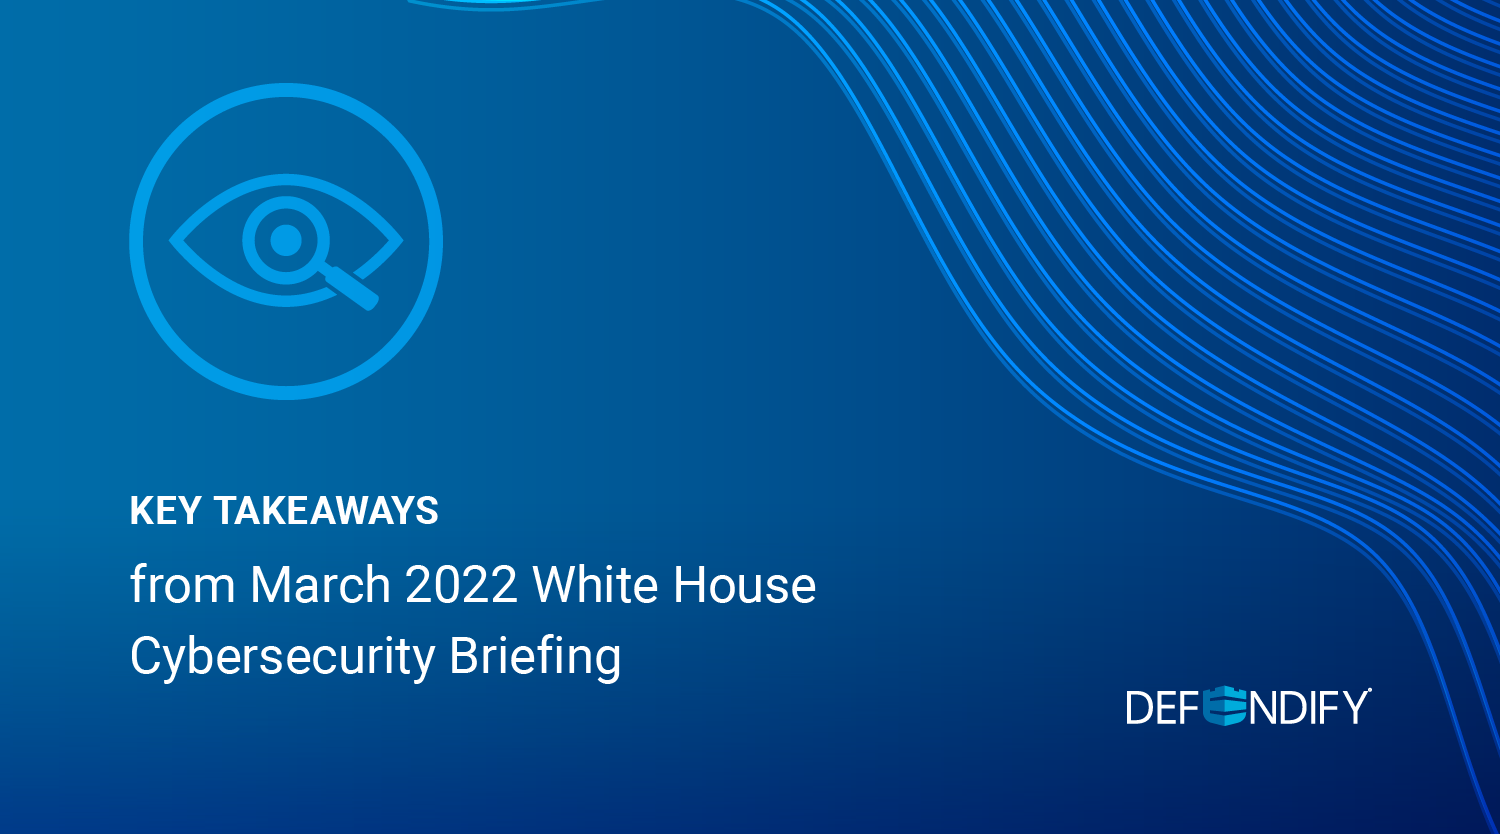 Key Takeaways from March 2022 White House Cybersecurity Briefing